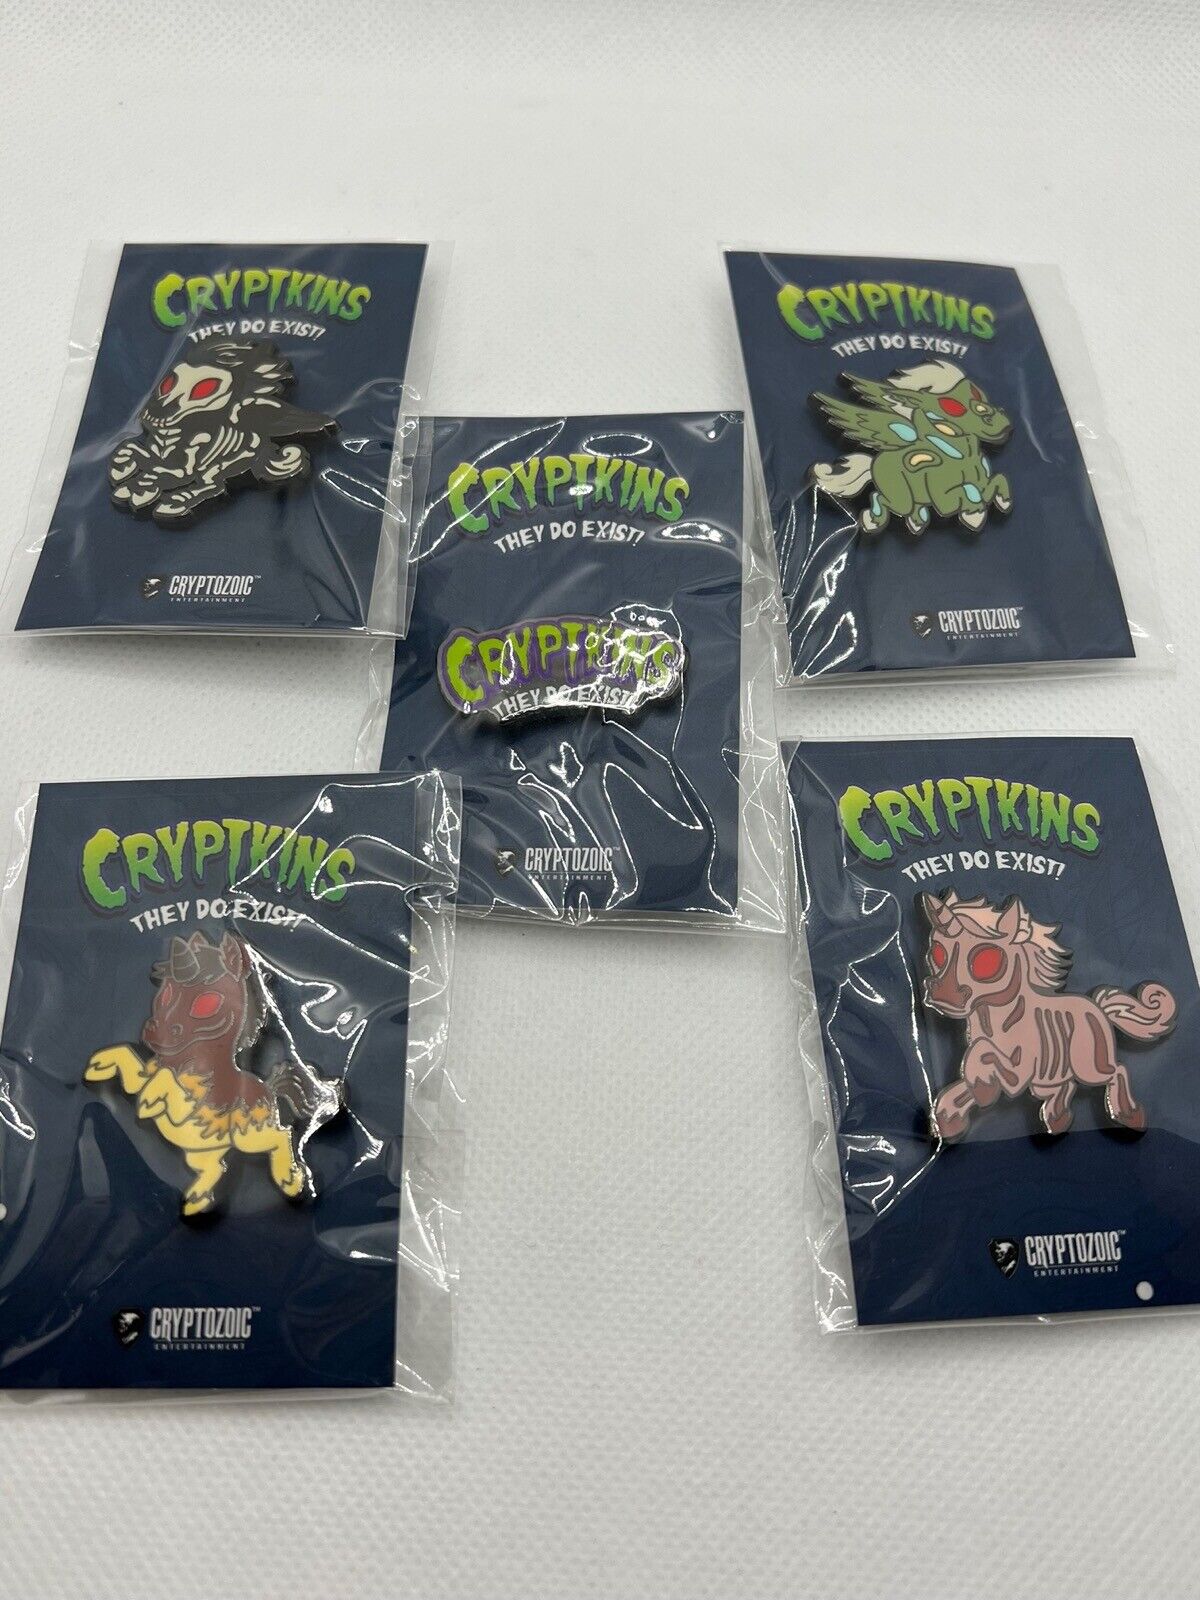 SDCC 2022 EXCLUSIVE Cryptozoic Cryptkins Horse Collection Enamel Pin Set of 5